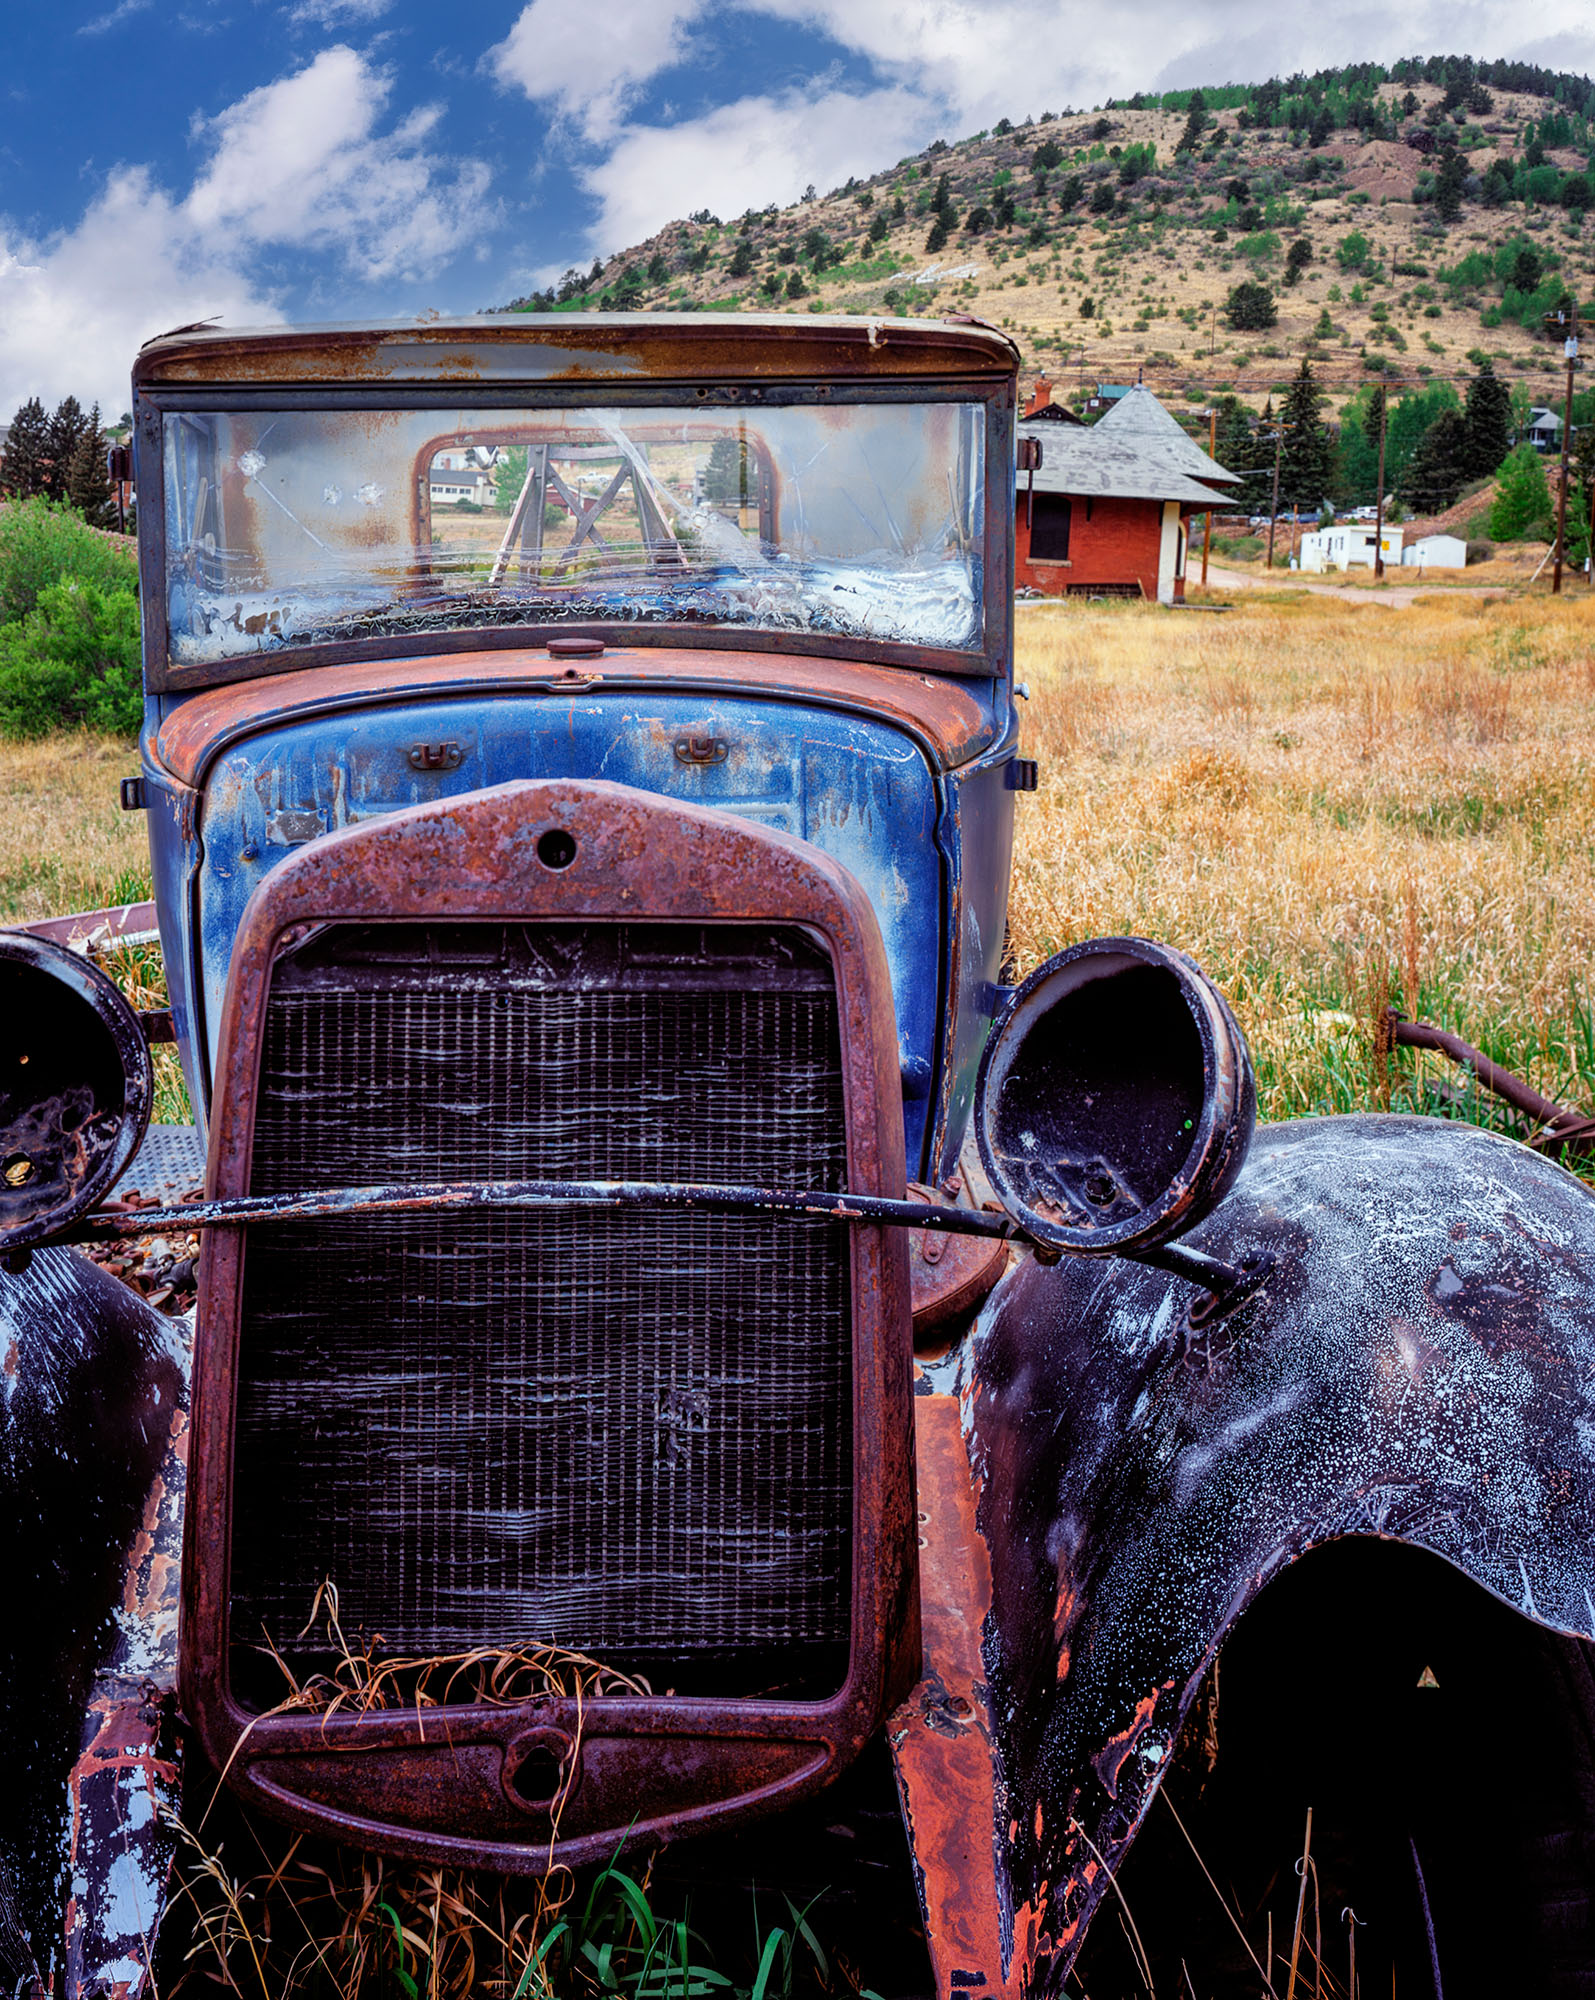 This vertical image, taken in Victor, Colorado, offers a poignant glimpse of an old Ford tow truck, now abandoned in the fields...